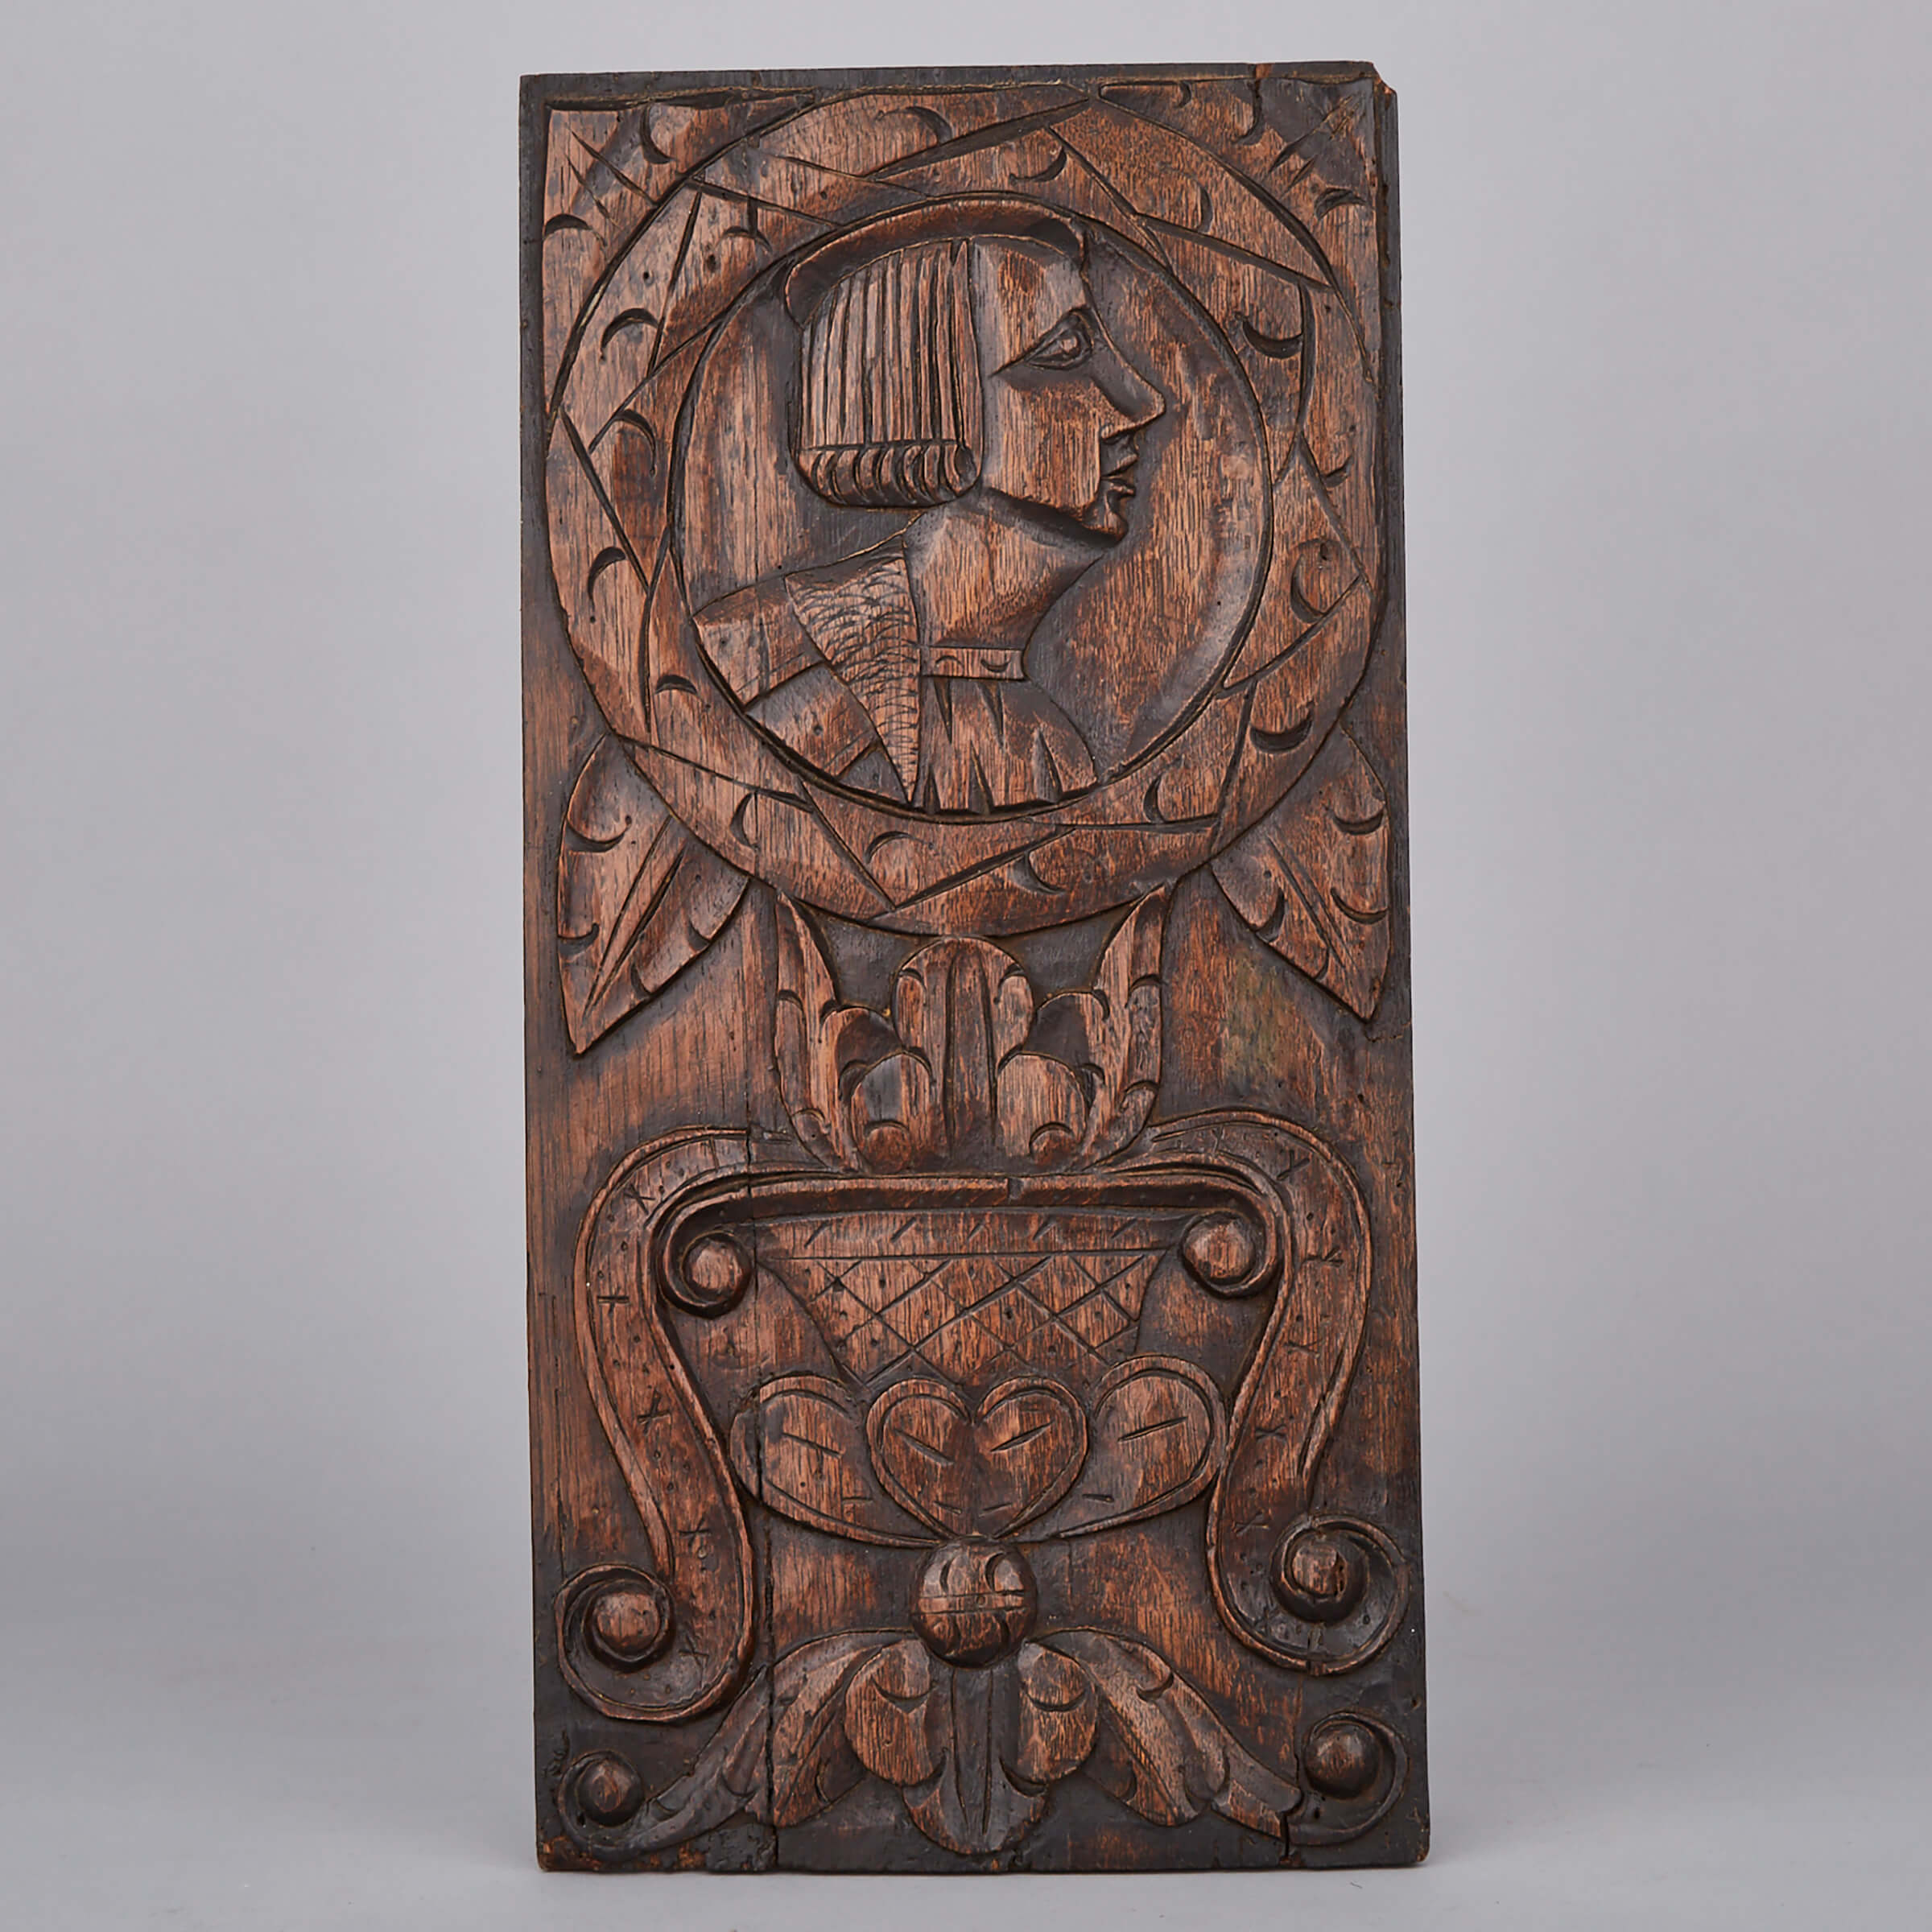 English Relief Carved Oak Romayne Panel, 16th century